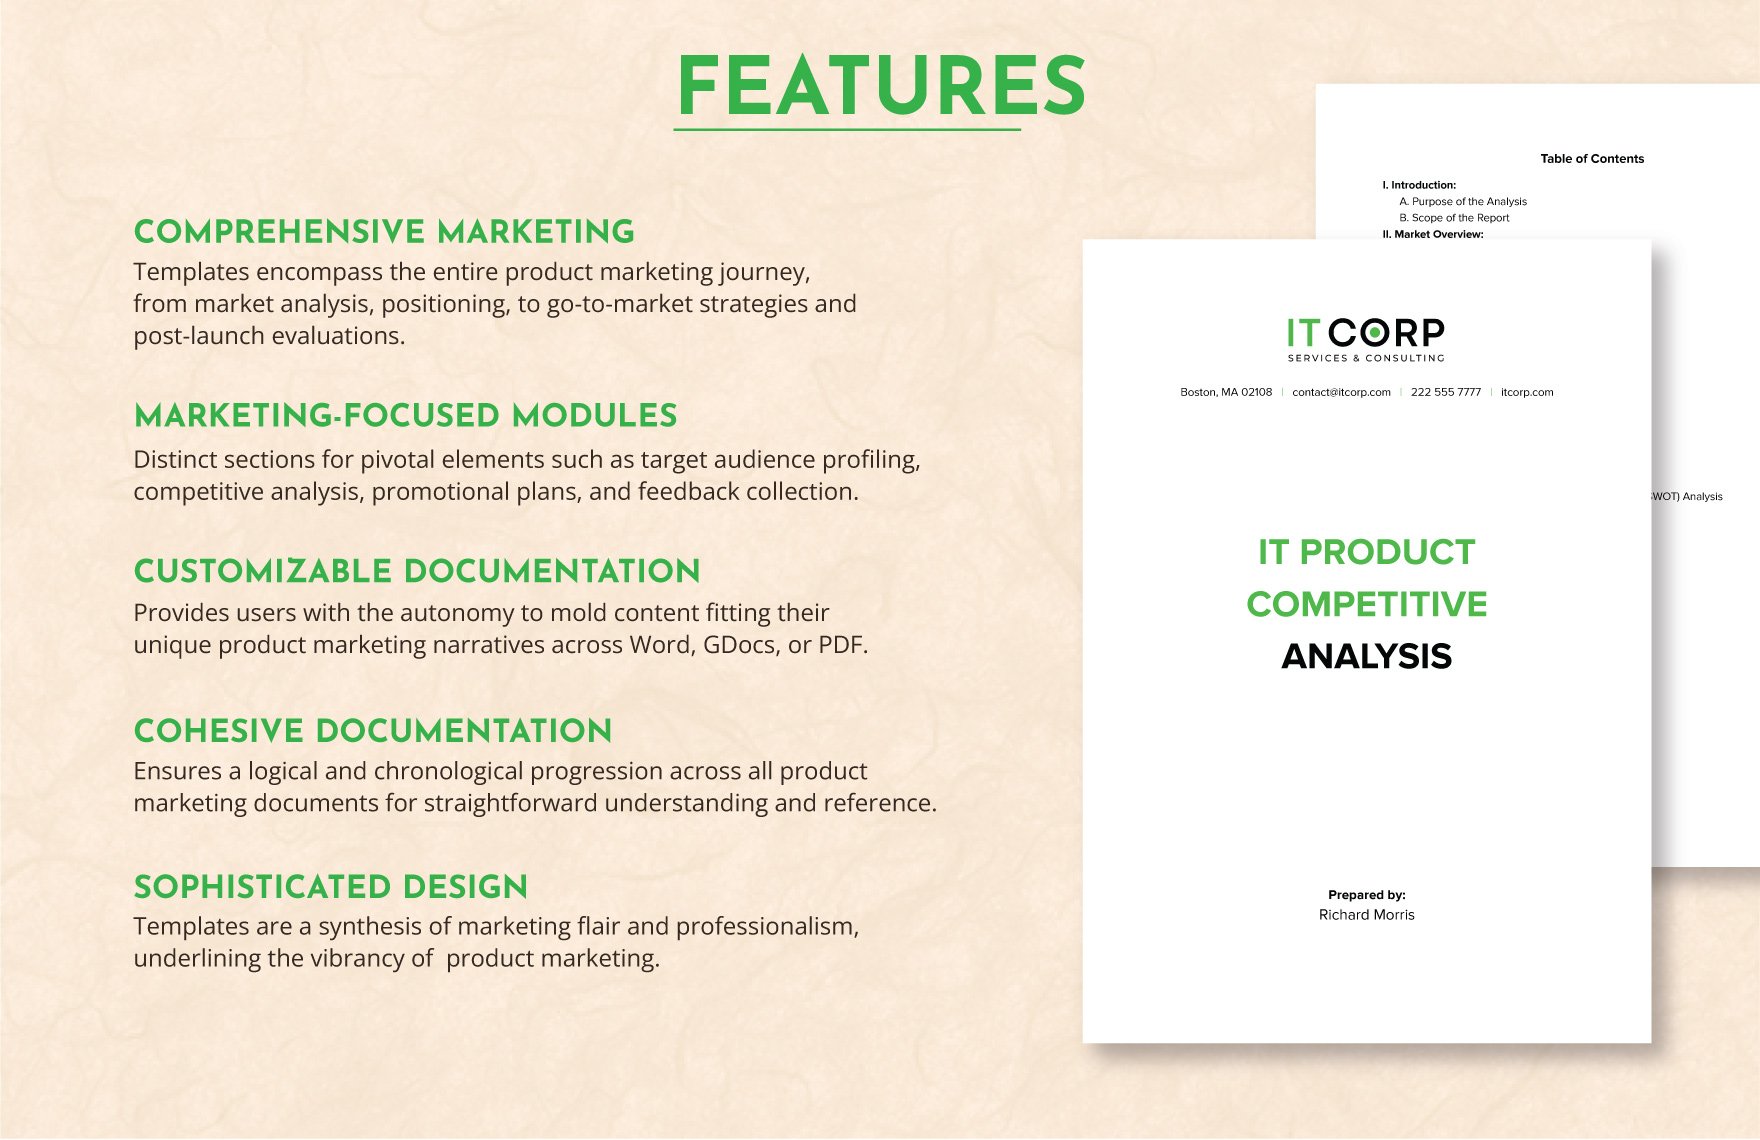 IT Product Competitive Analysis Template